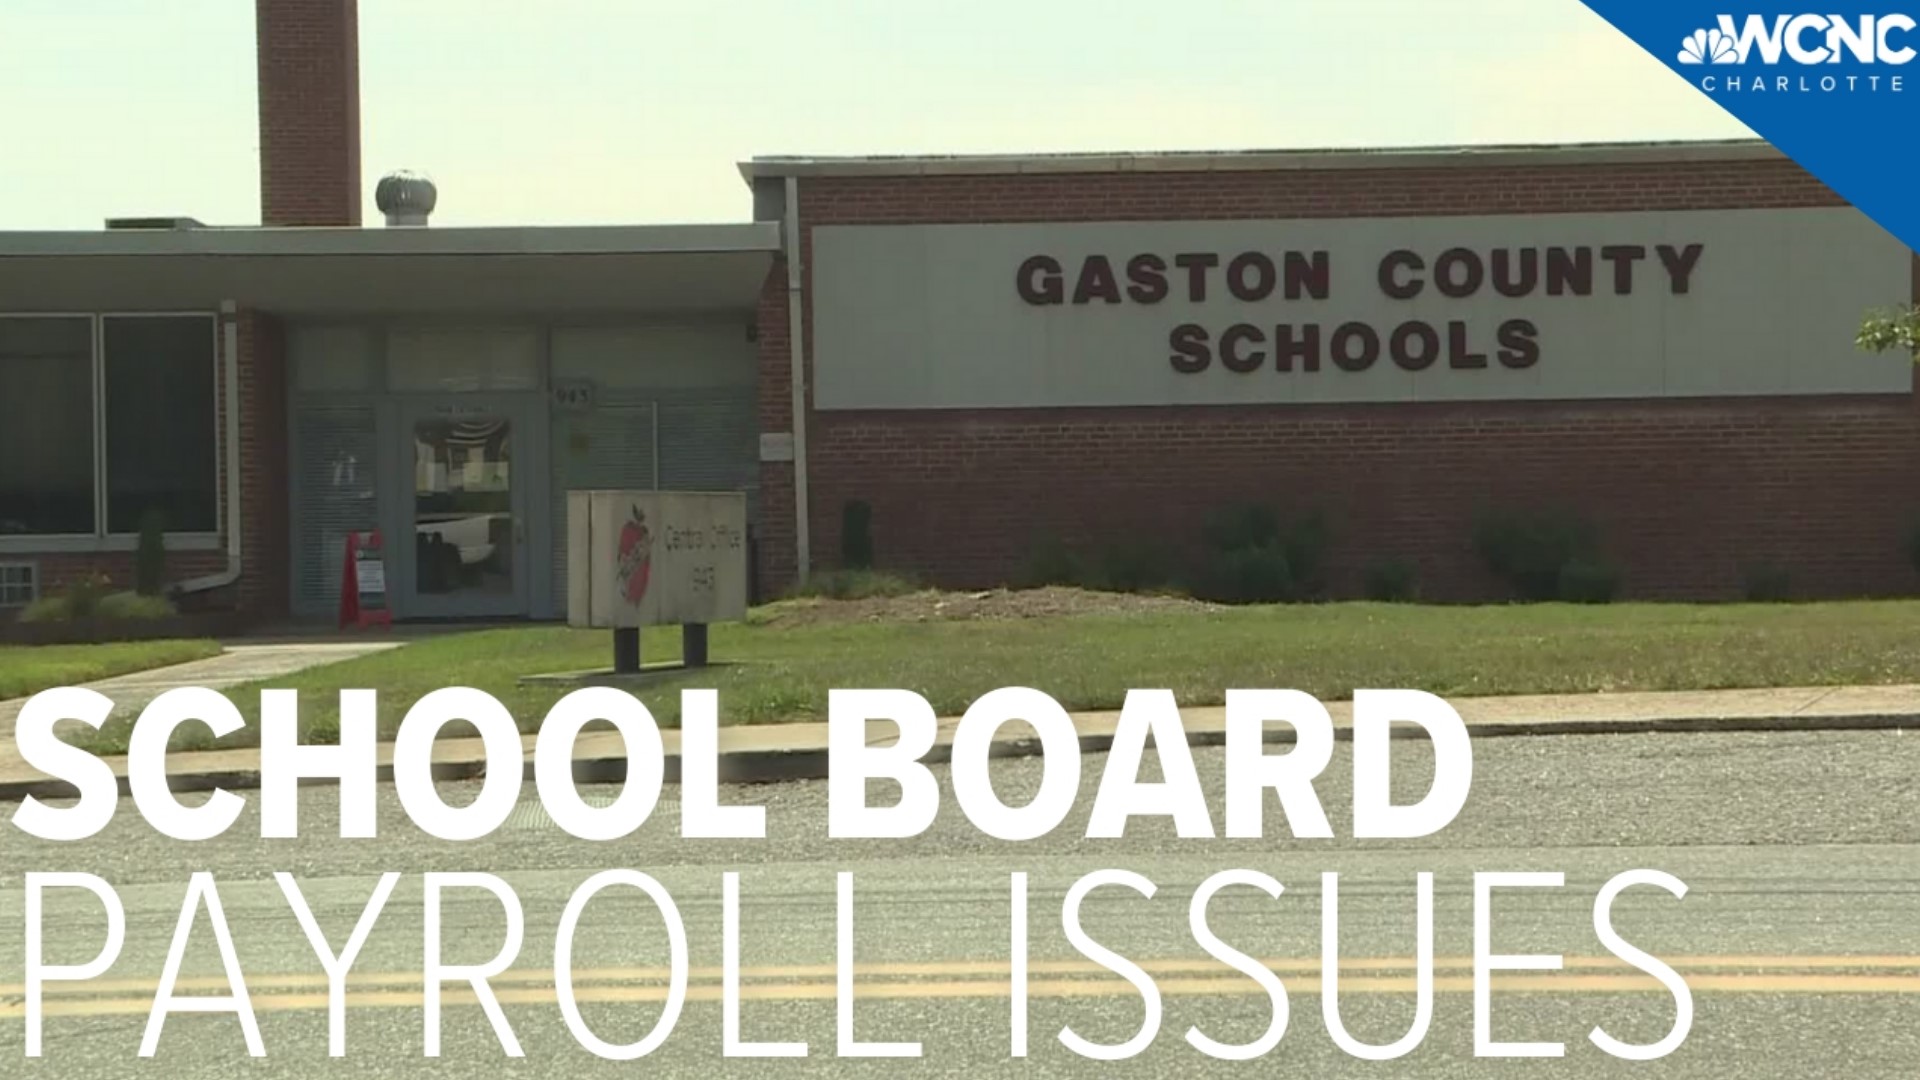 Gary Hoskins, the Gaston County Schools associate superintendent for finance and operations, said they still have 463 employee folders remaining to address.